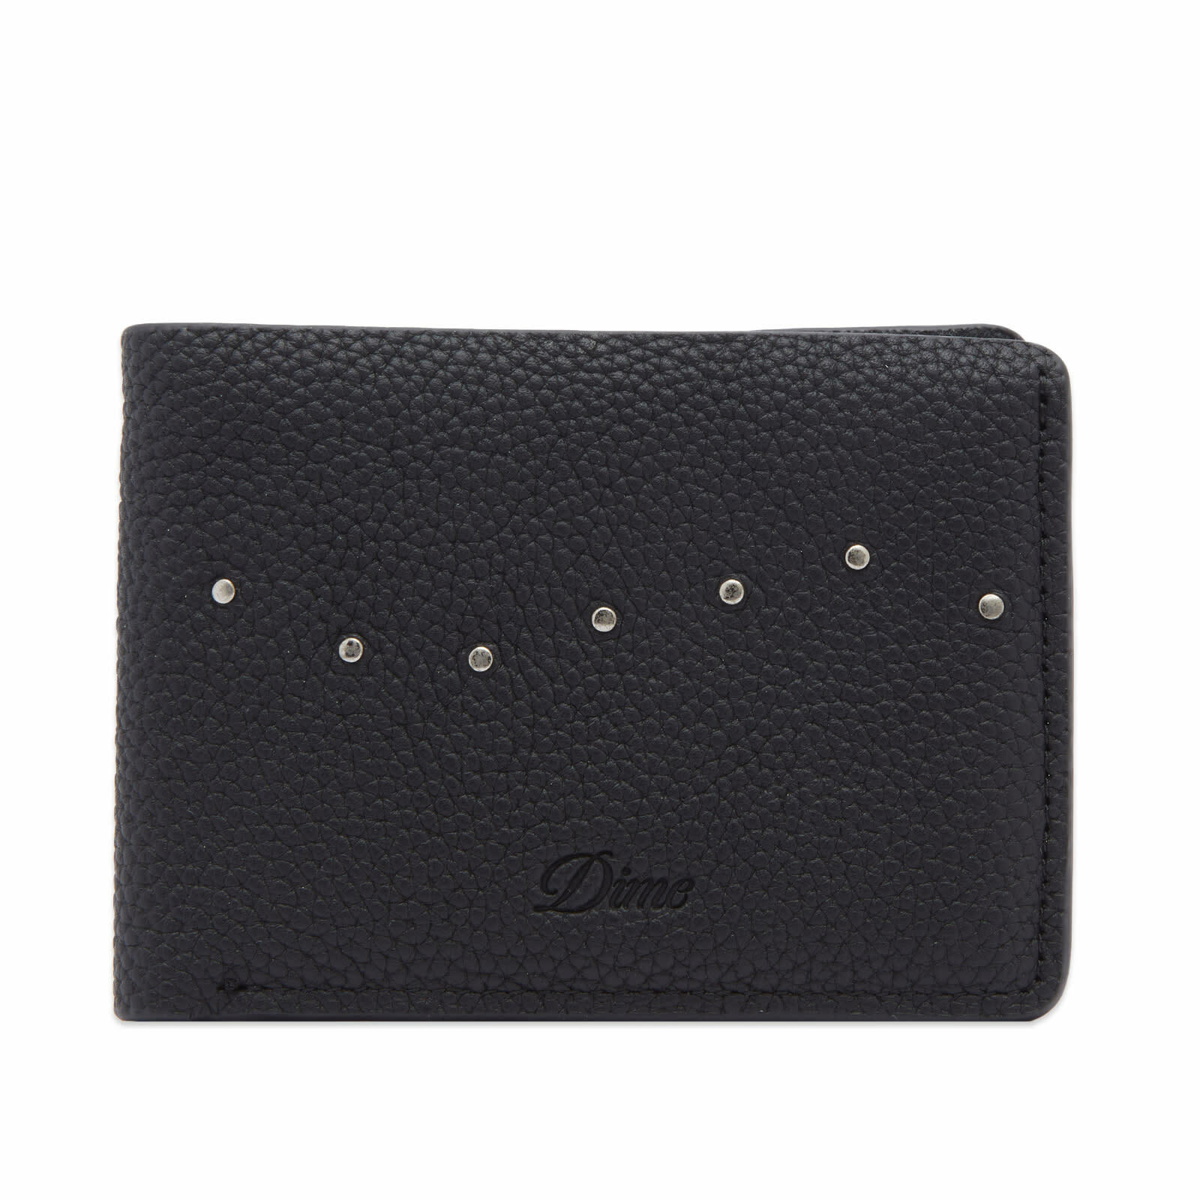 Dime Men's Quilted Leather Bifold Wallet in Black Dime